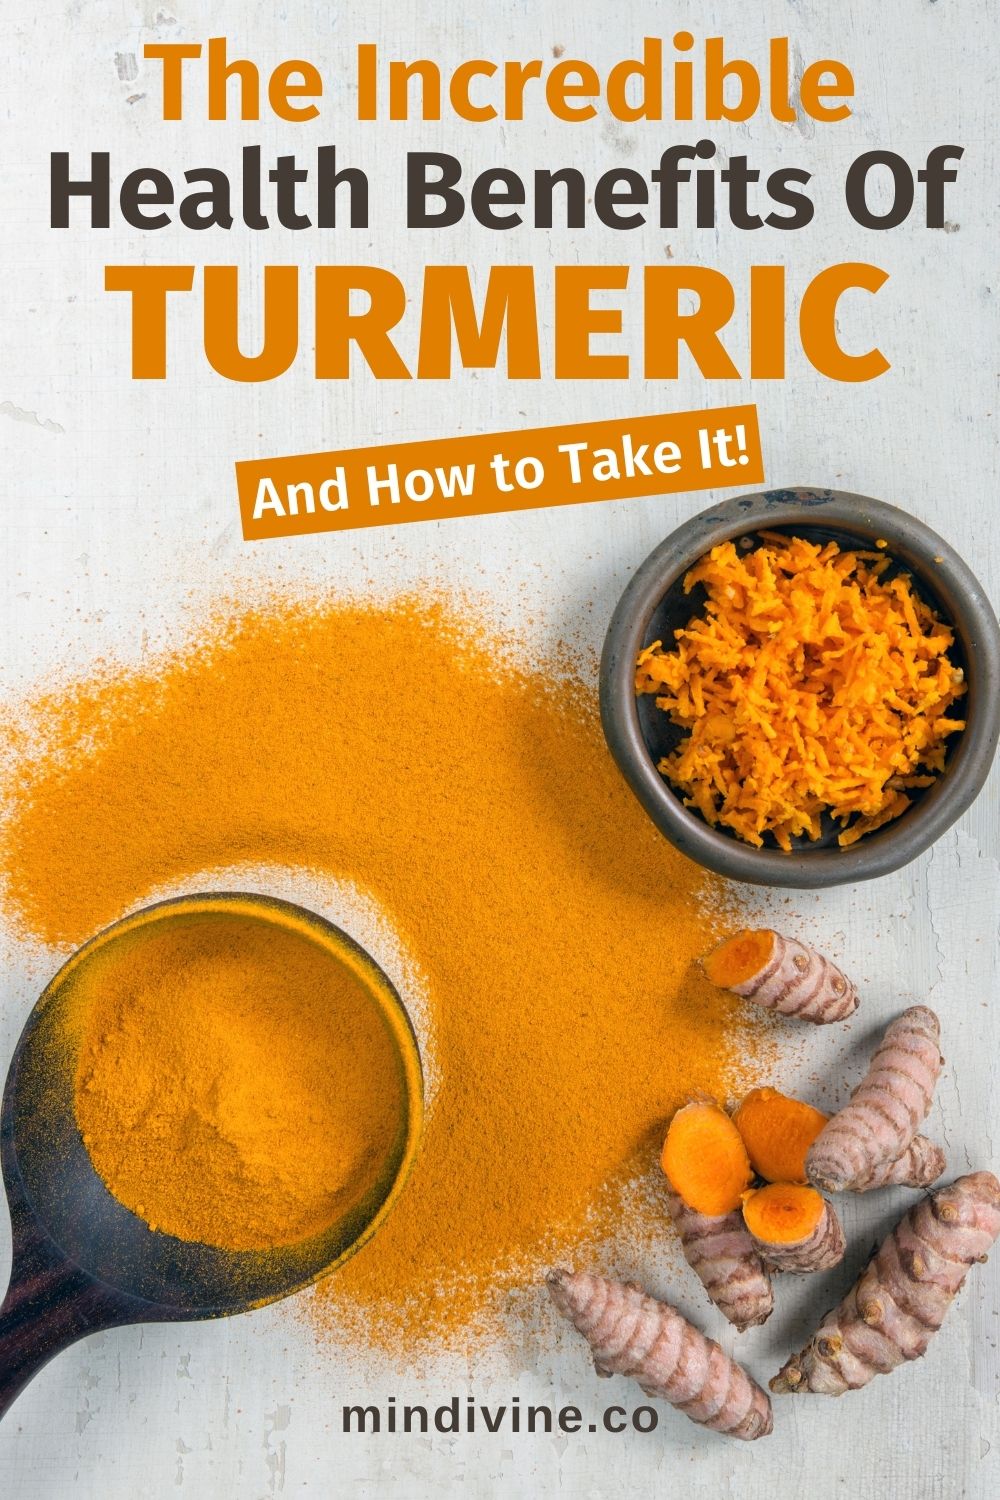 turmeric benefits and how to take it P 1